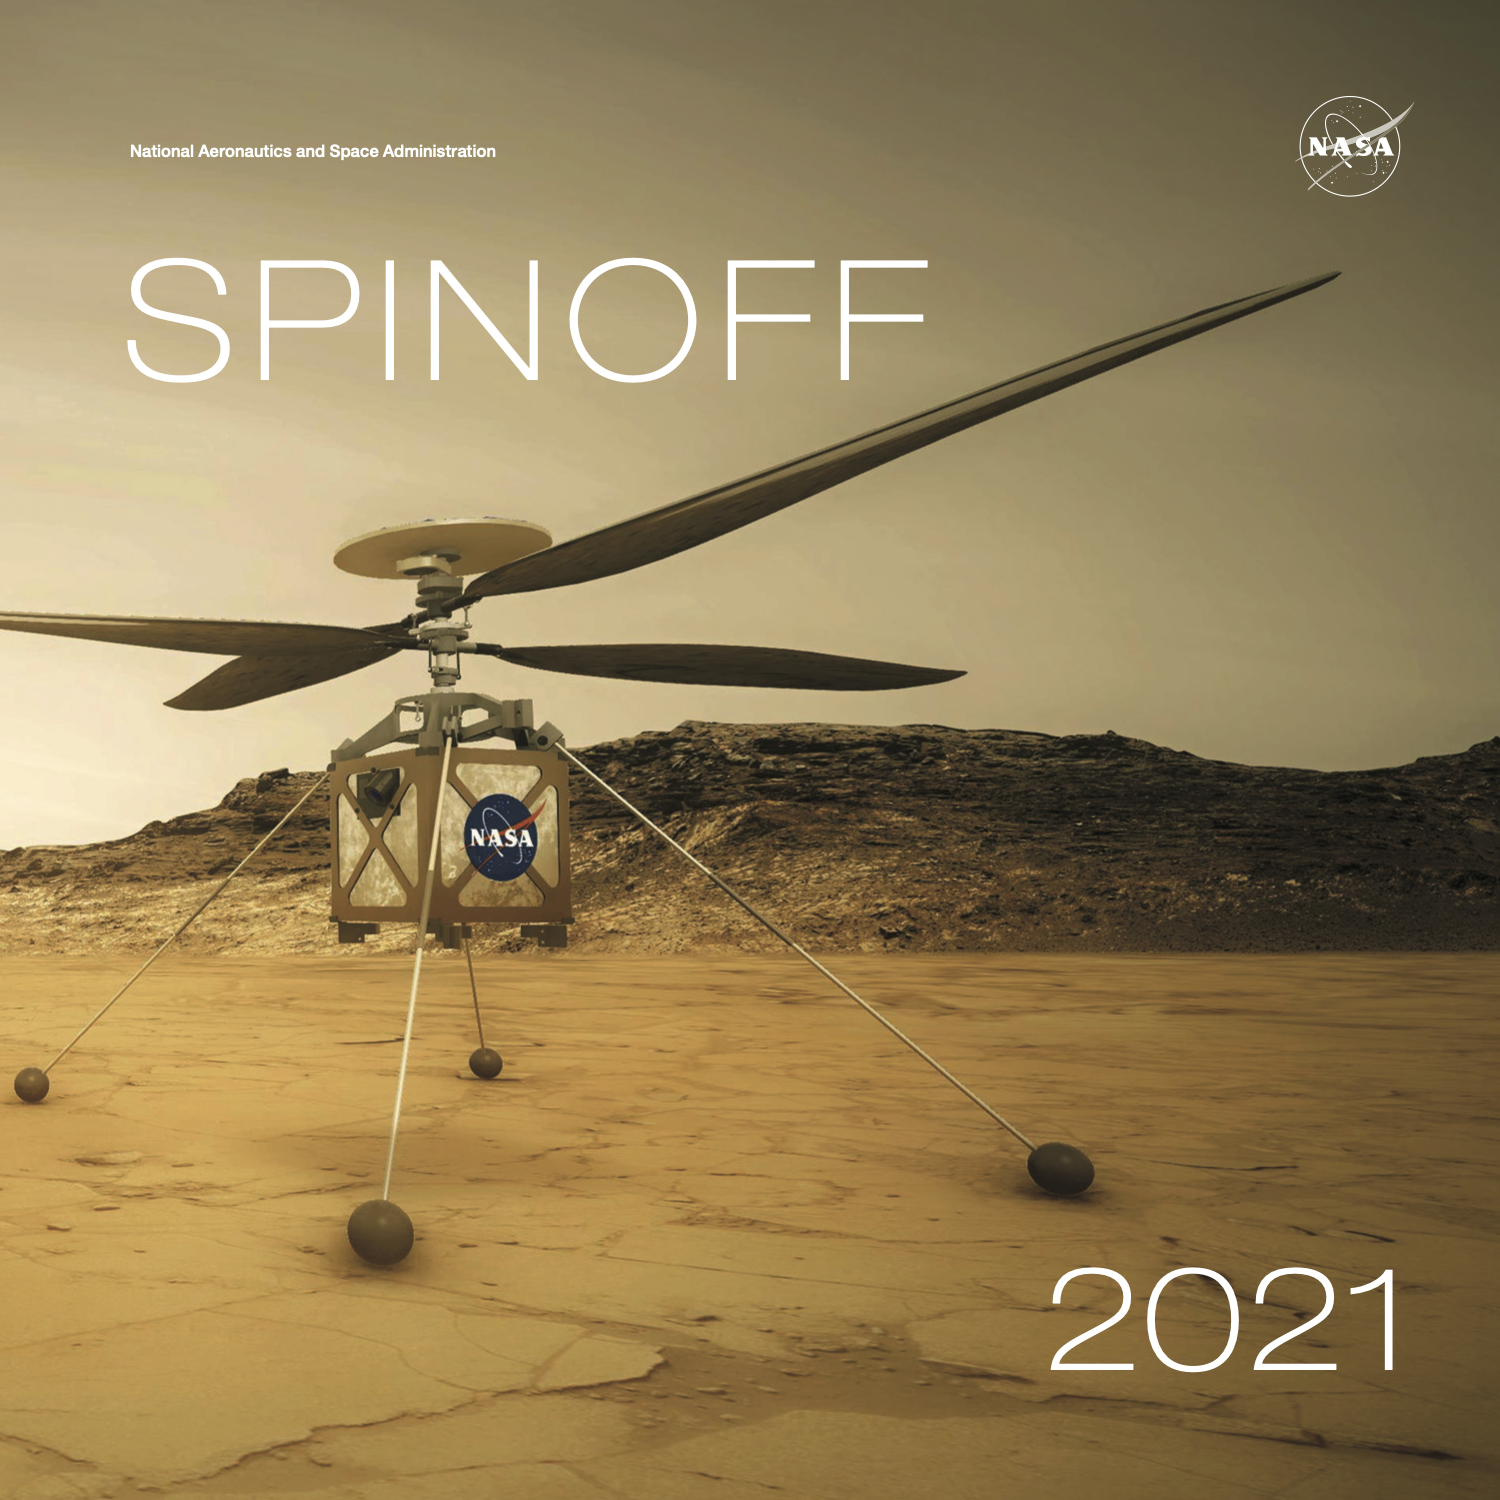 The redesigned 2021 NASA Spinoff publication features dozens of NASA innovations improving life on Earth